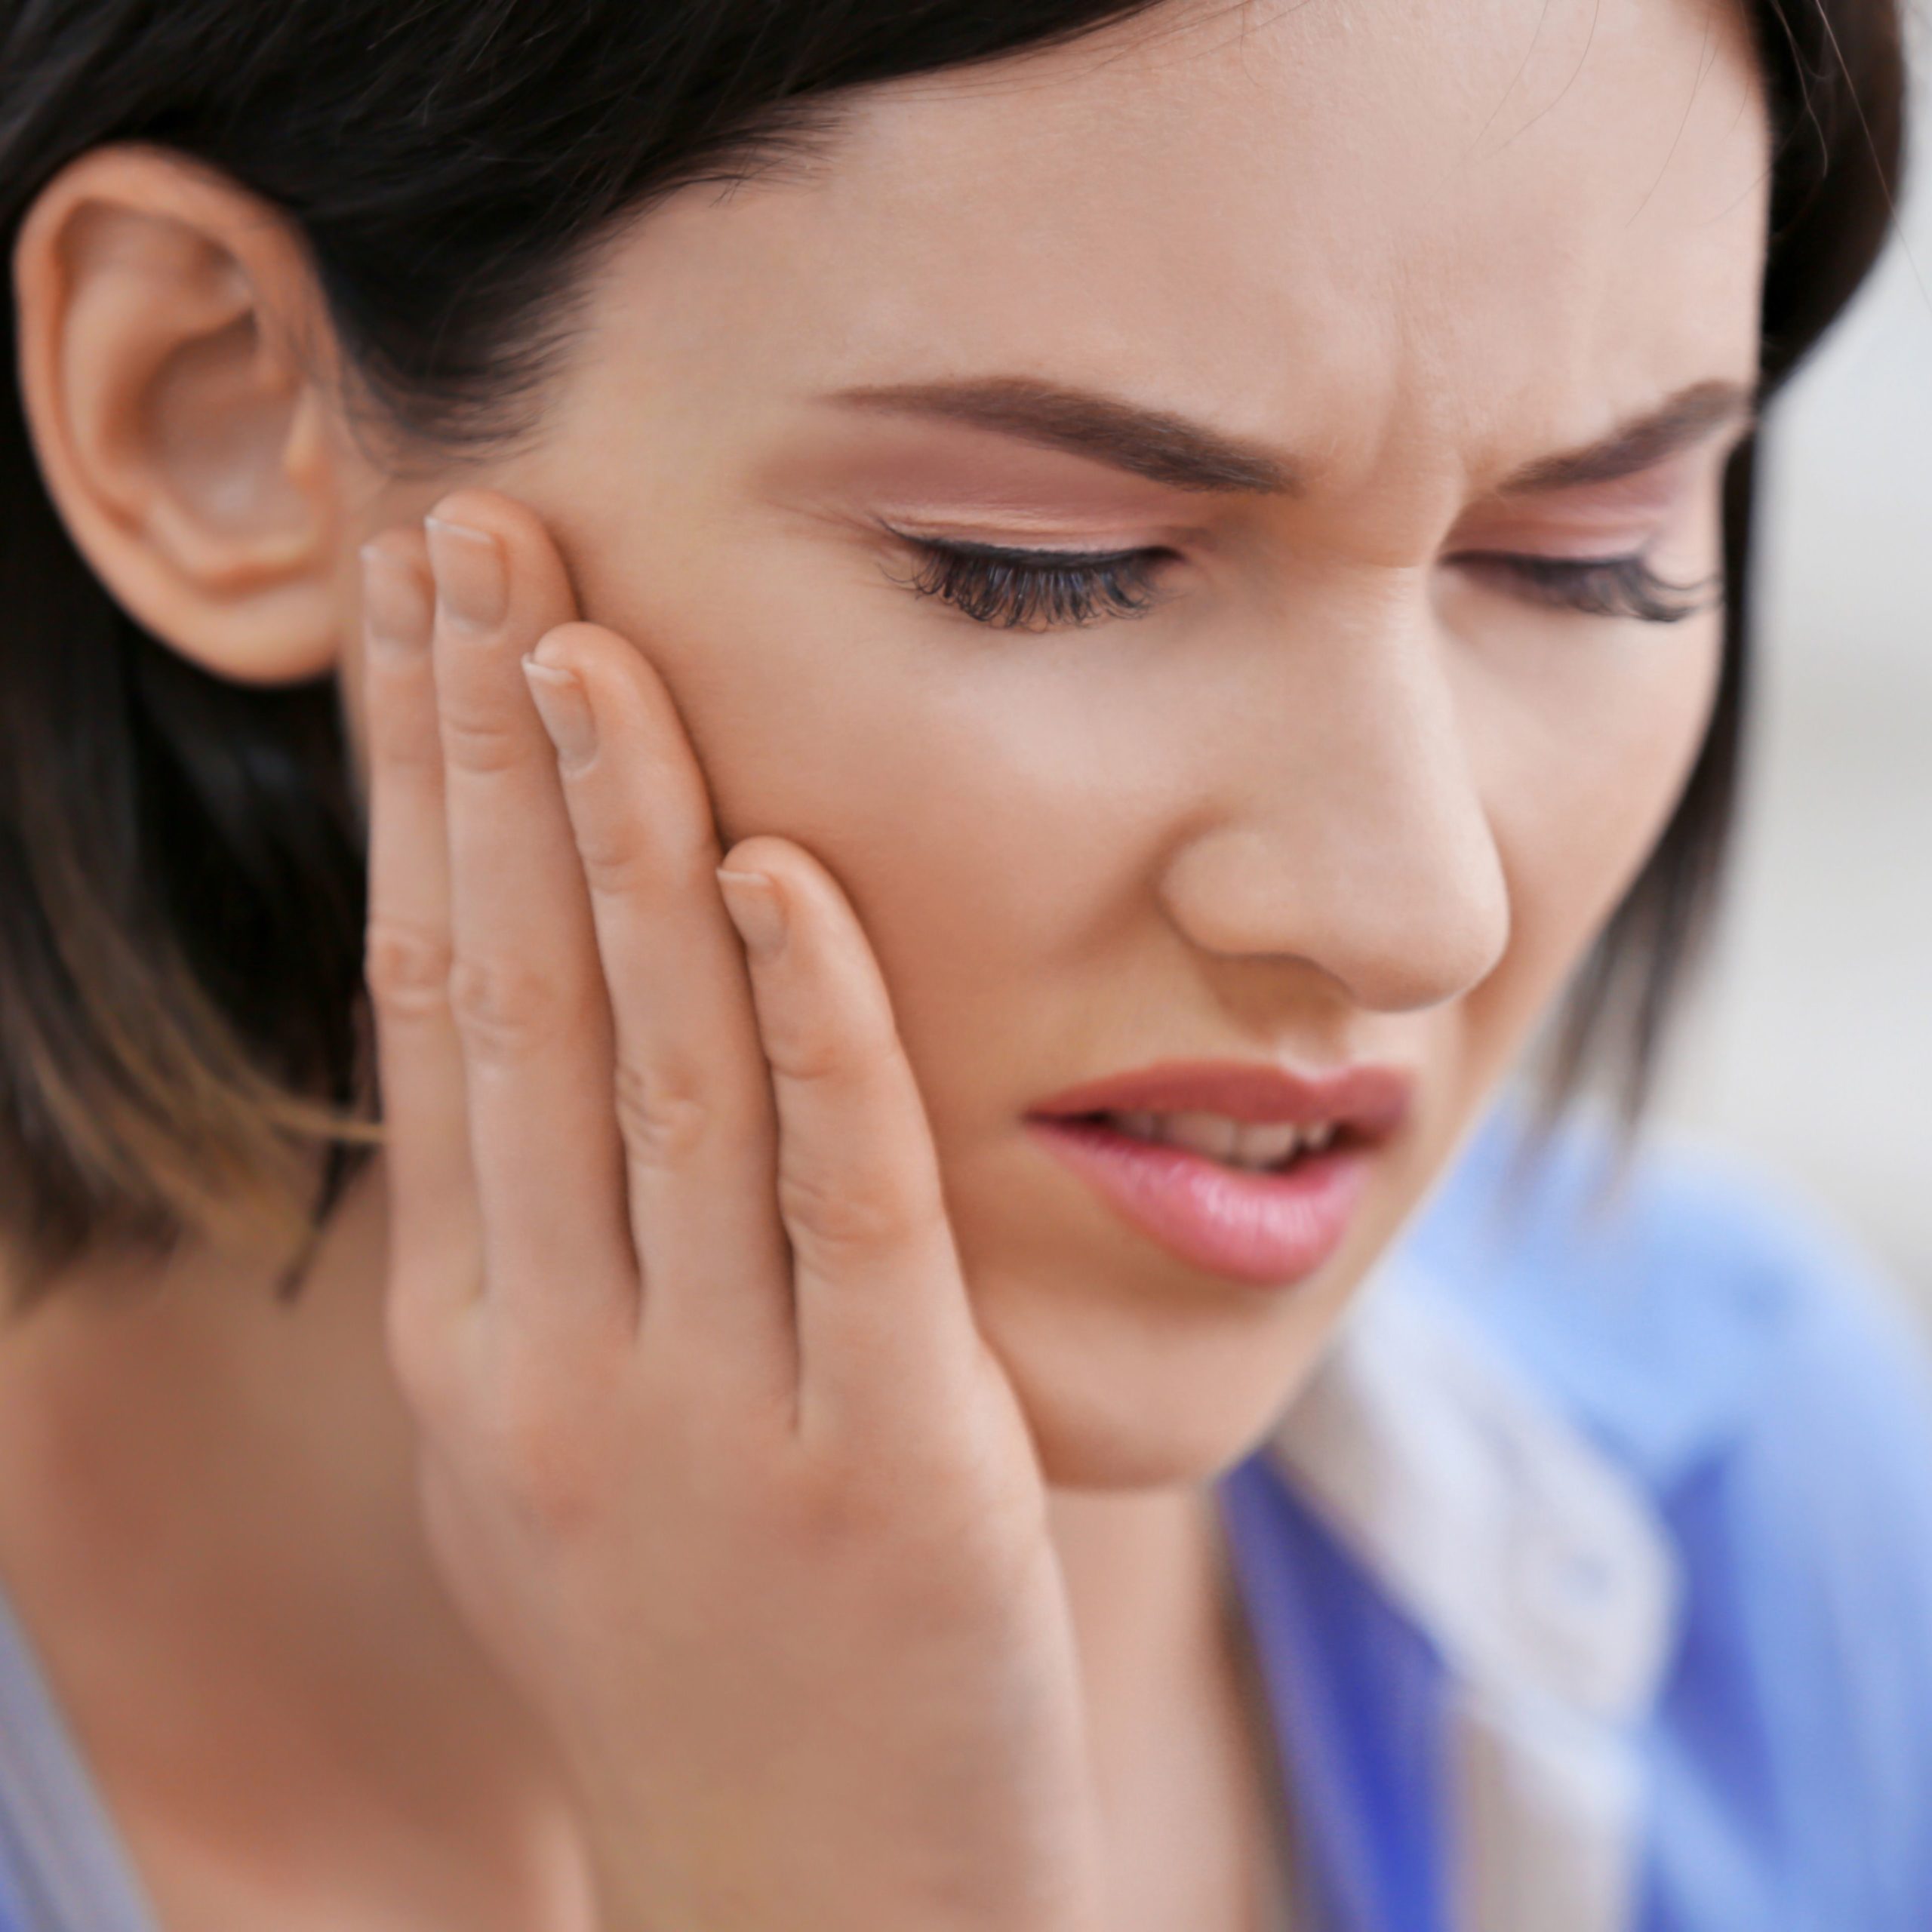 One early sign that a tooth may need to be extracted is pain. Patients can experience immediate relief once the compromised tooth is removed.